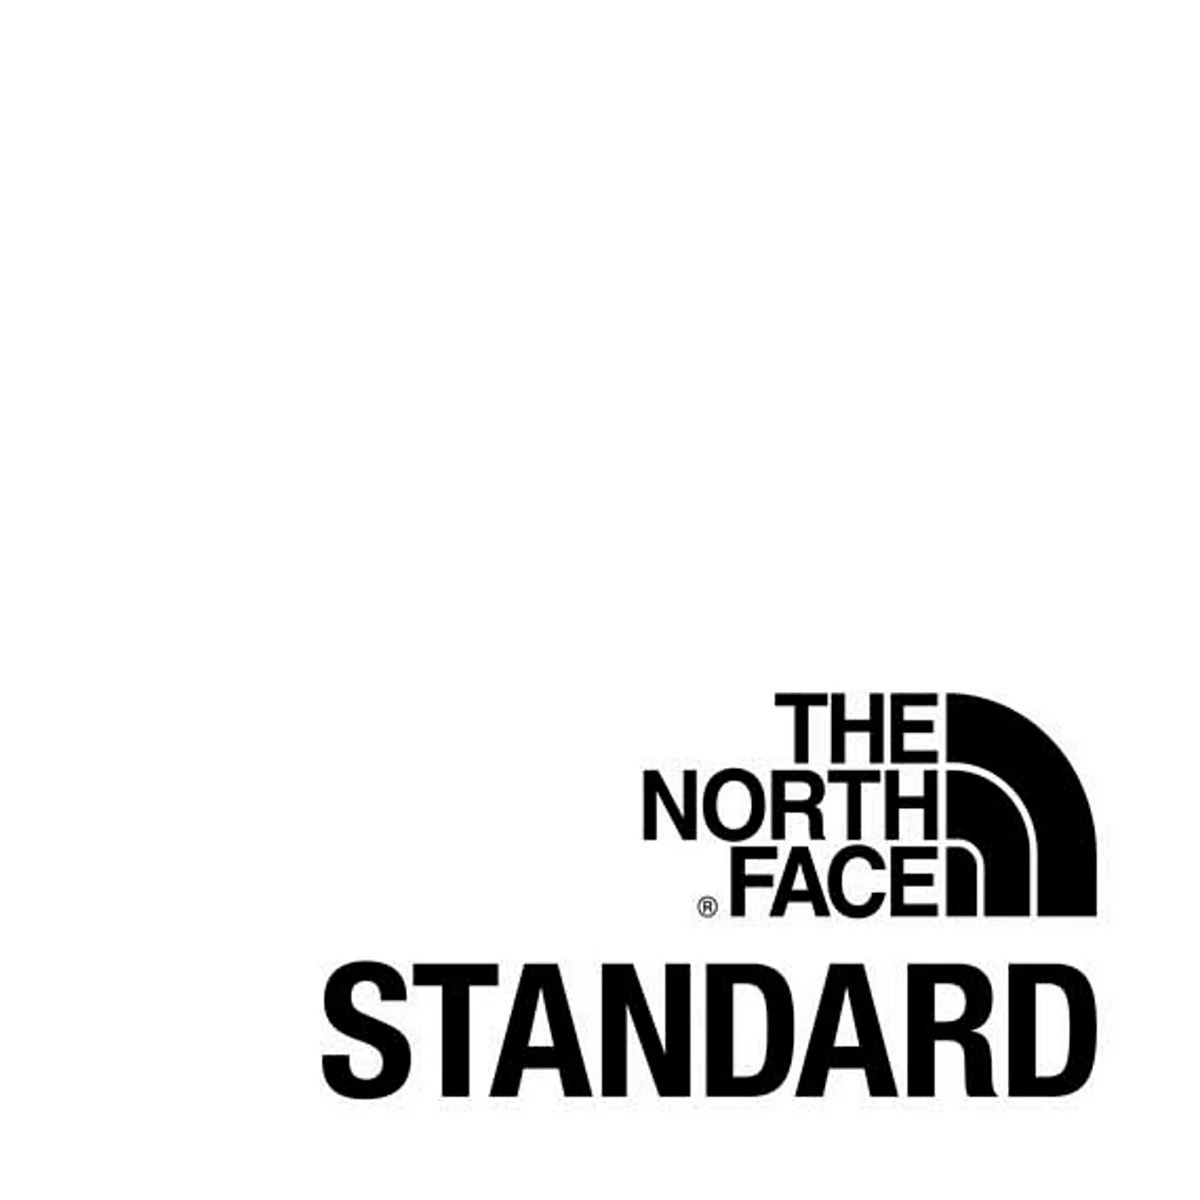 The North face logo